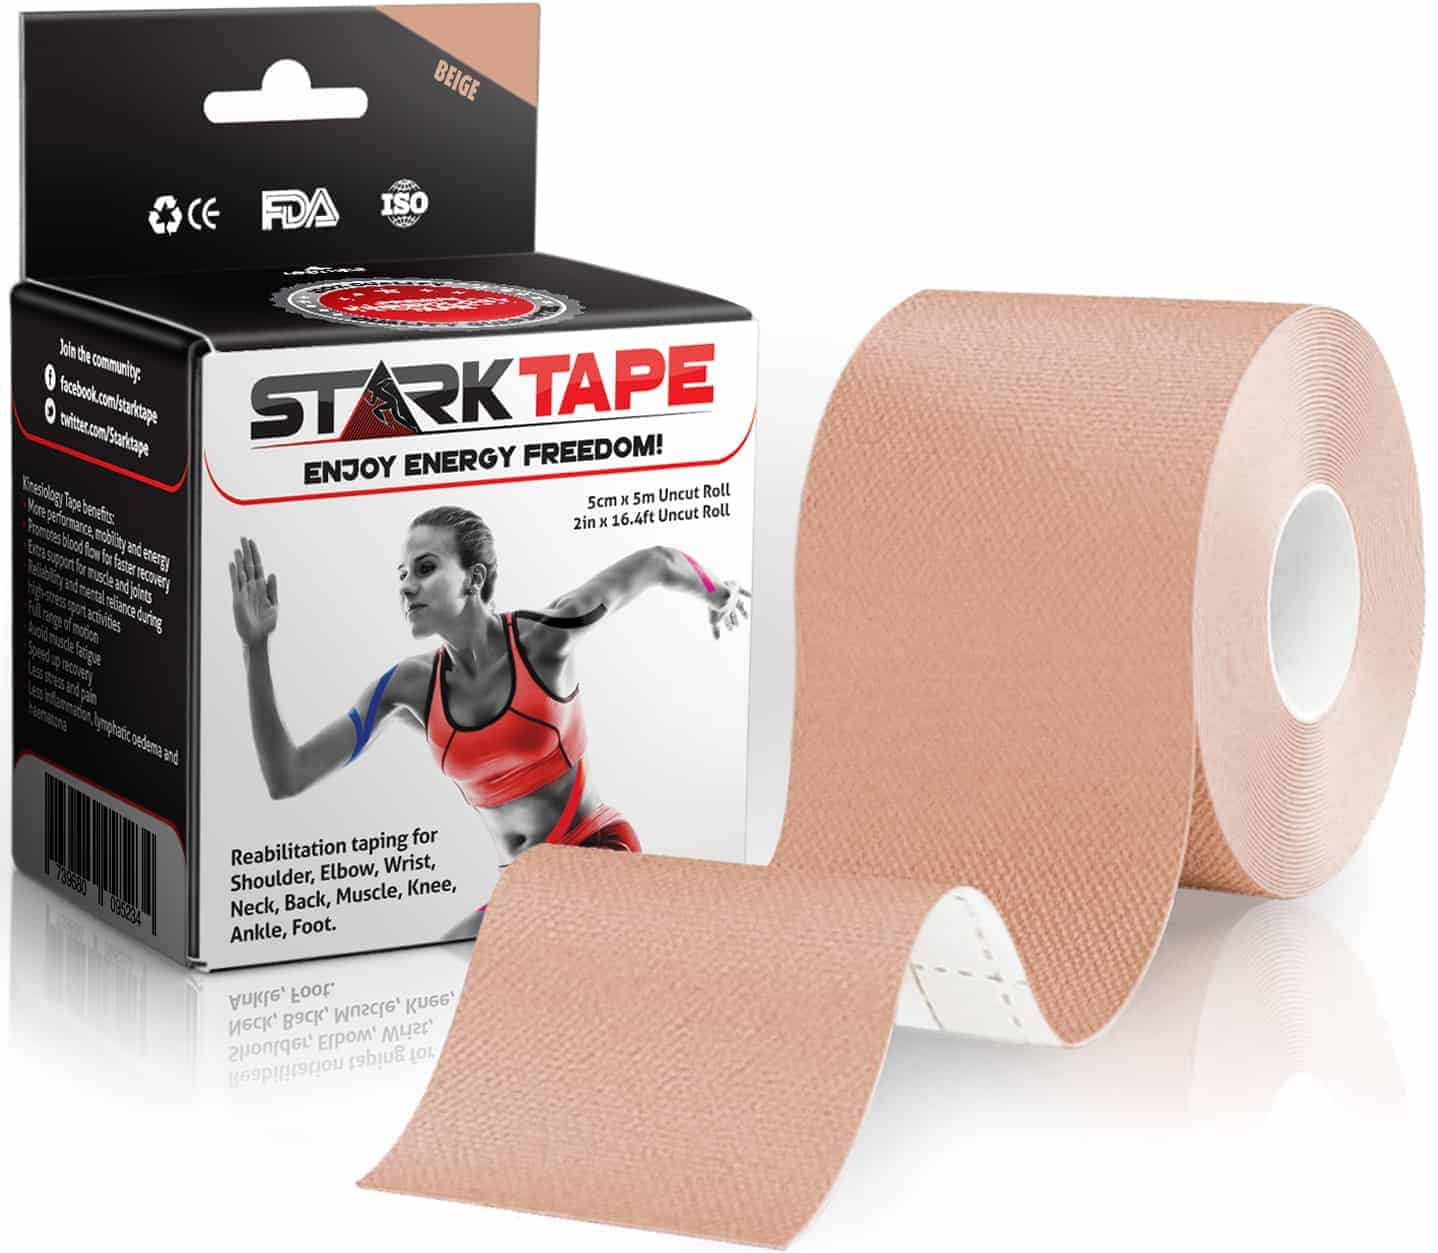 Kinesiology Tape Shoulder, Knee ~Designed to Boost Athletic Performance